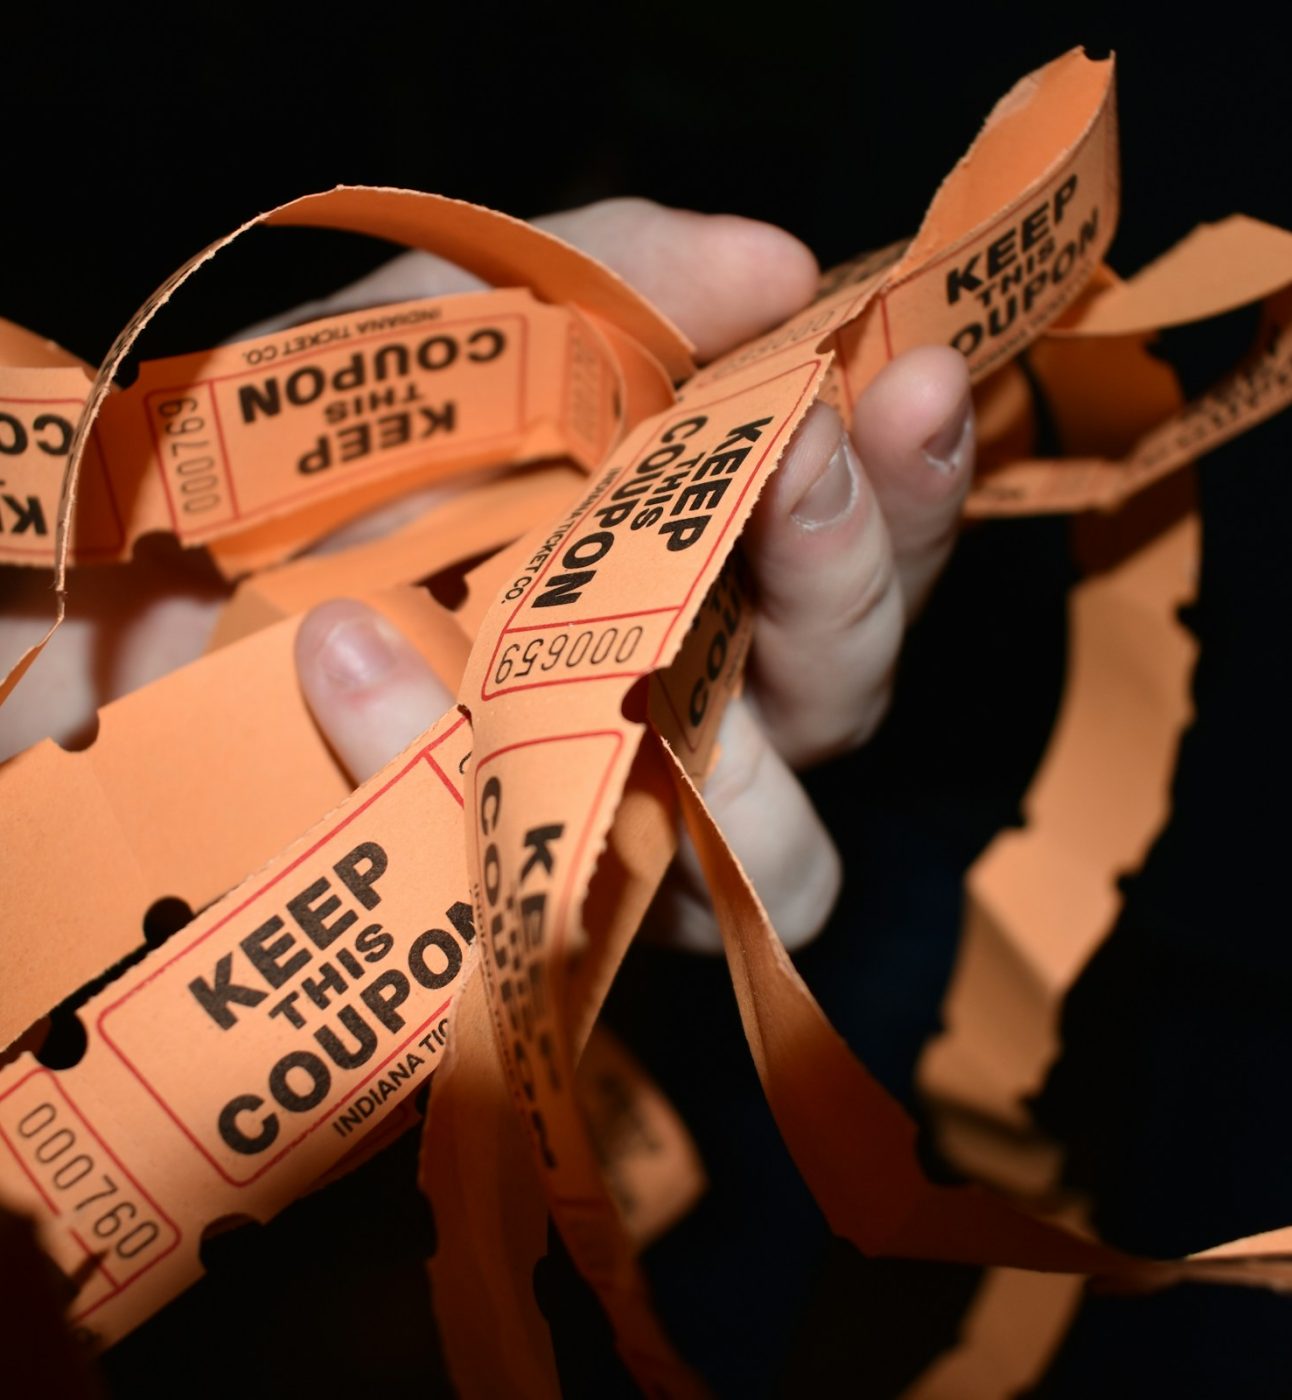 A hand holding a pile of orange raffle tickets saying 'keep this coupon' on each one